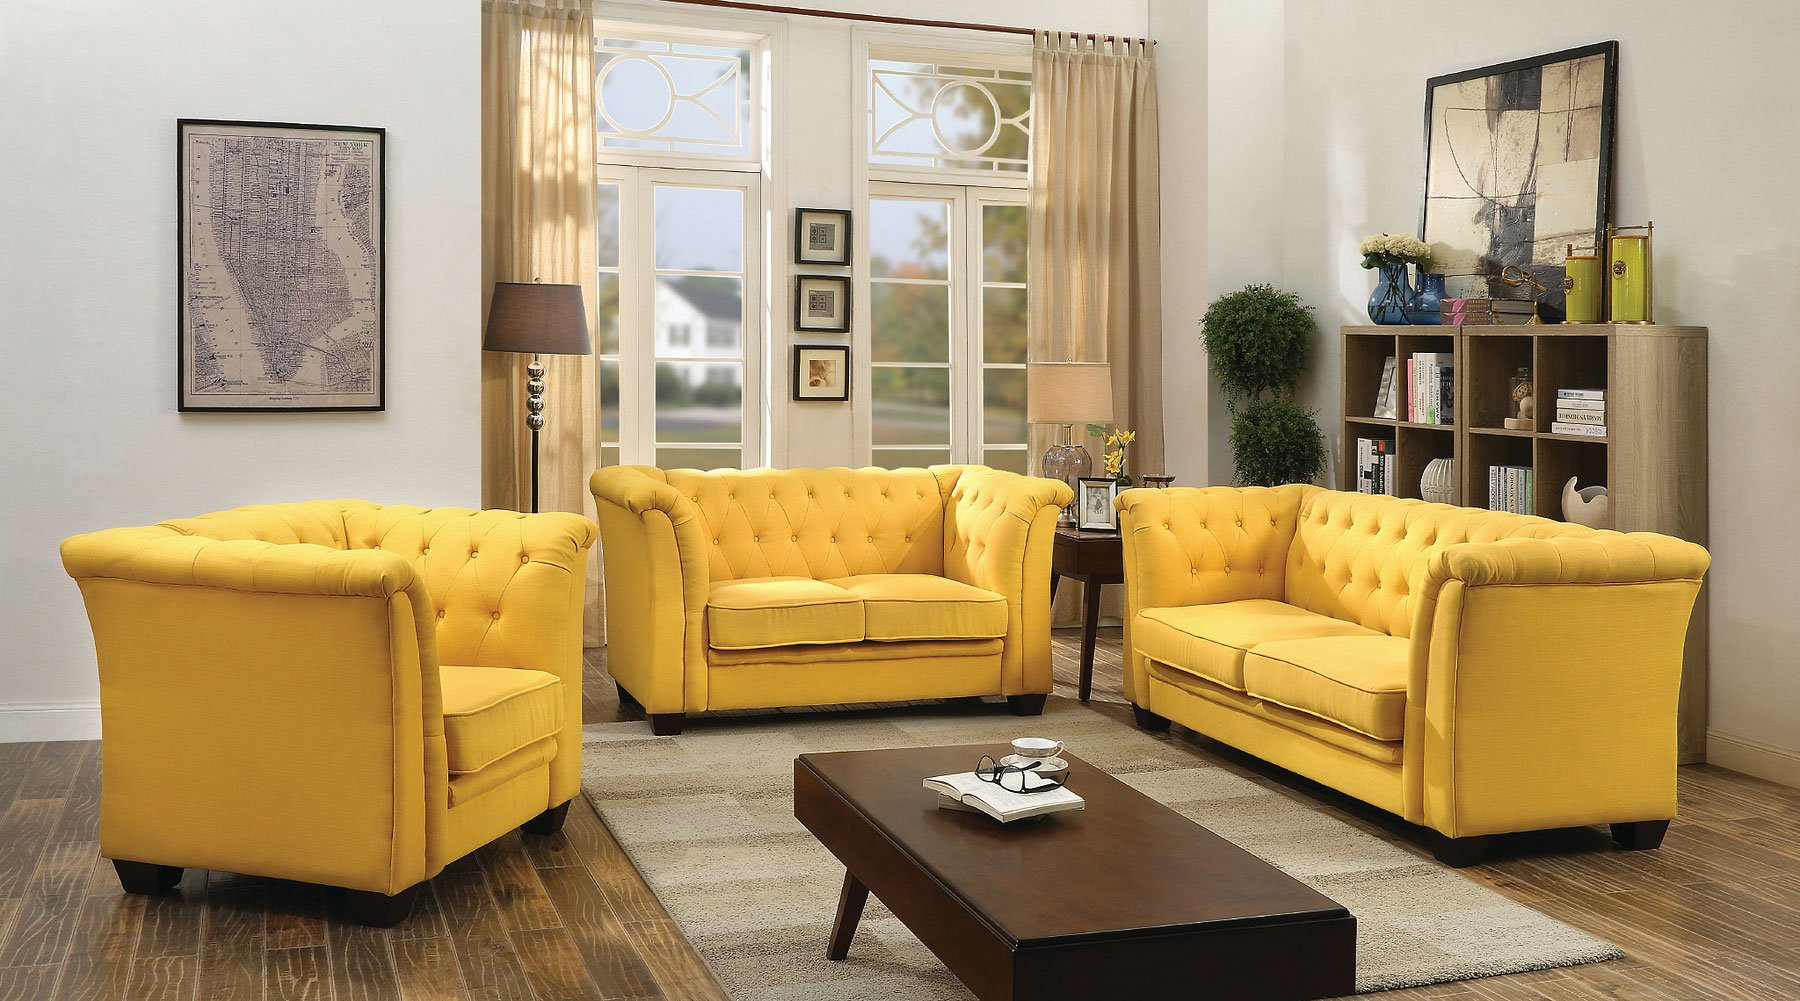 Colorful Living Room Sets
 G322 Tufted Living Room Set Yellow Living Room Sets